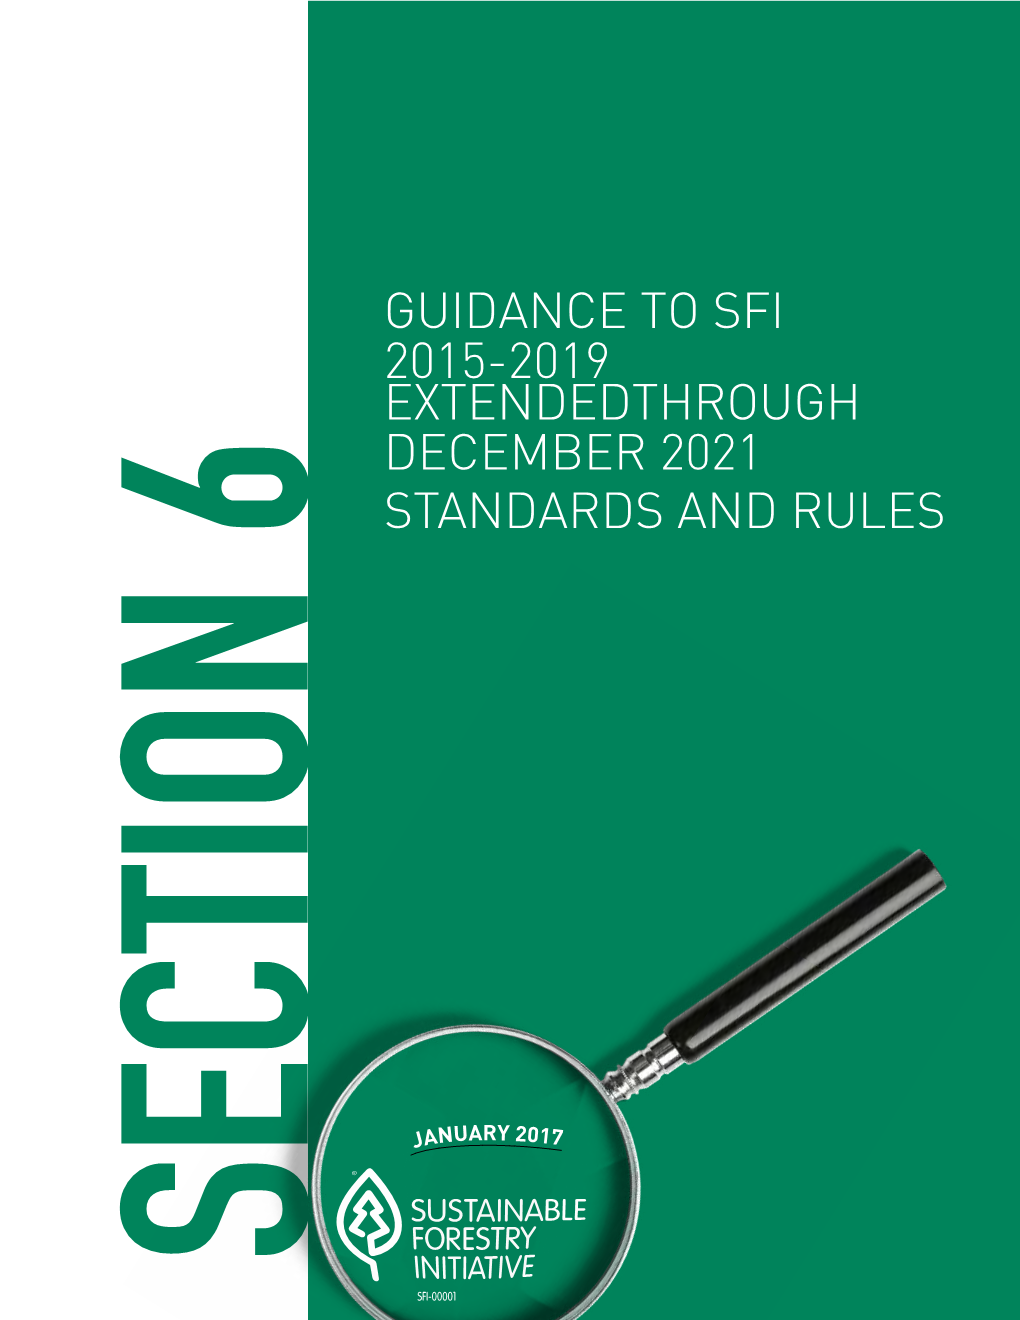 Guidance to Sfi 2015-2019 Standards and Rules